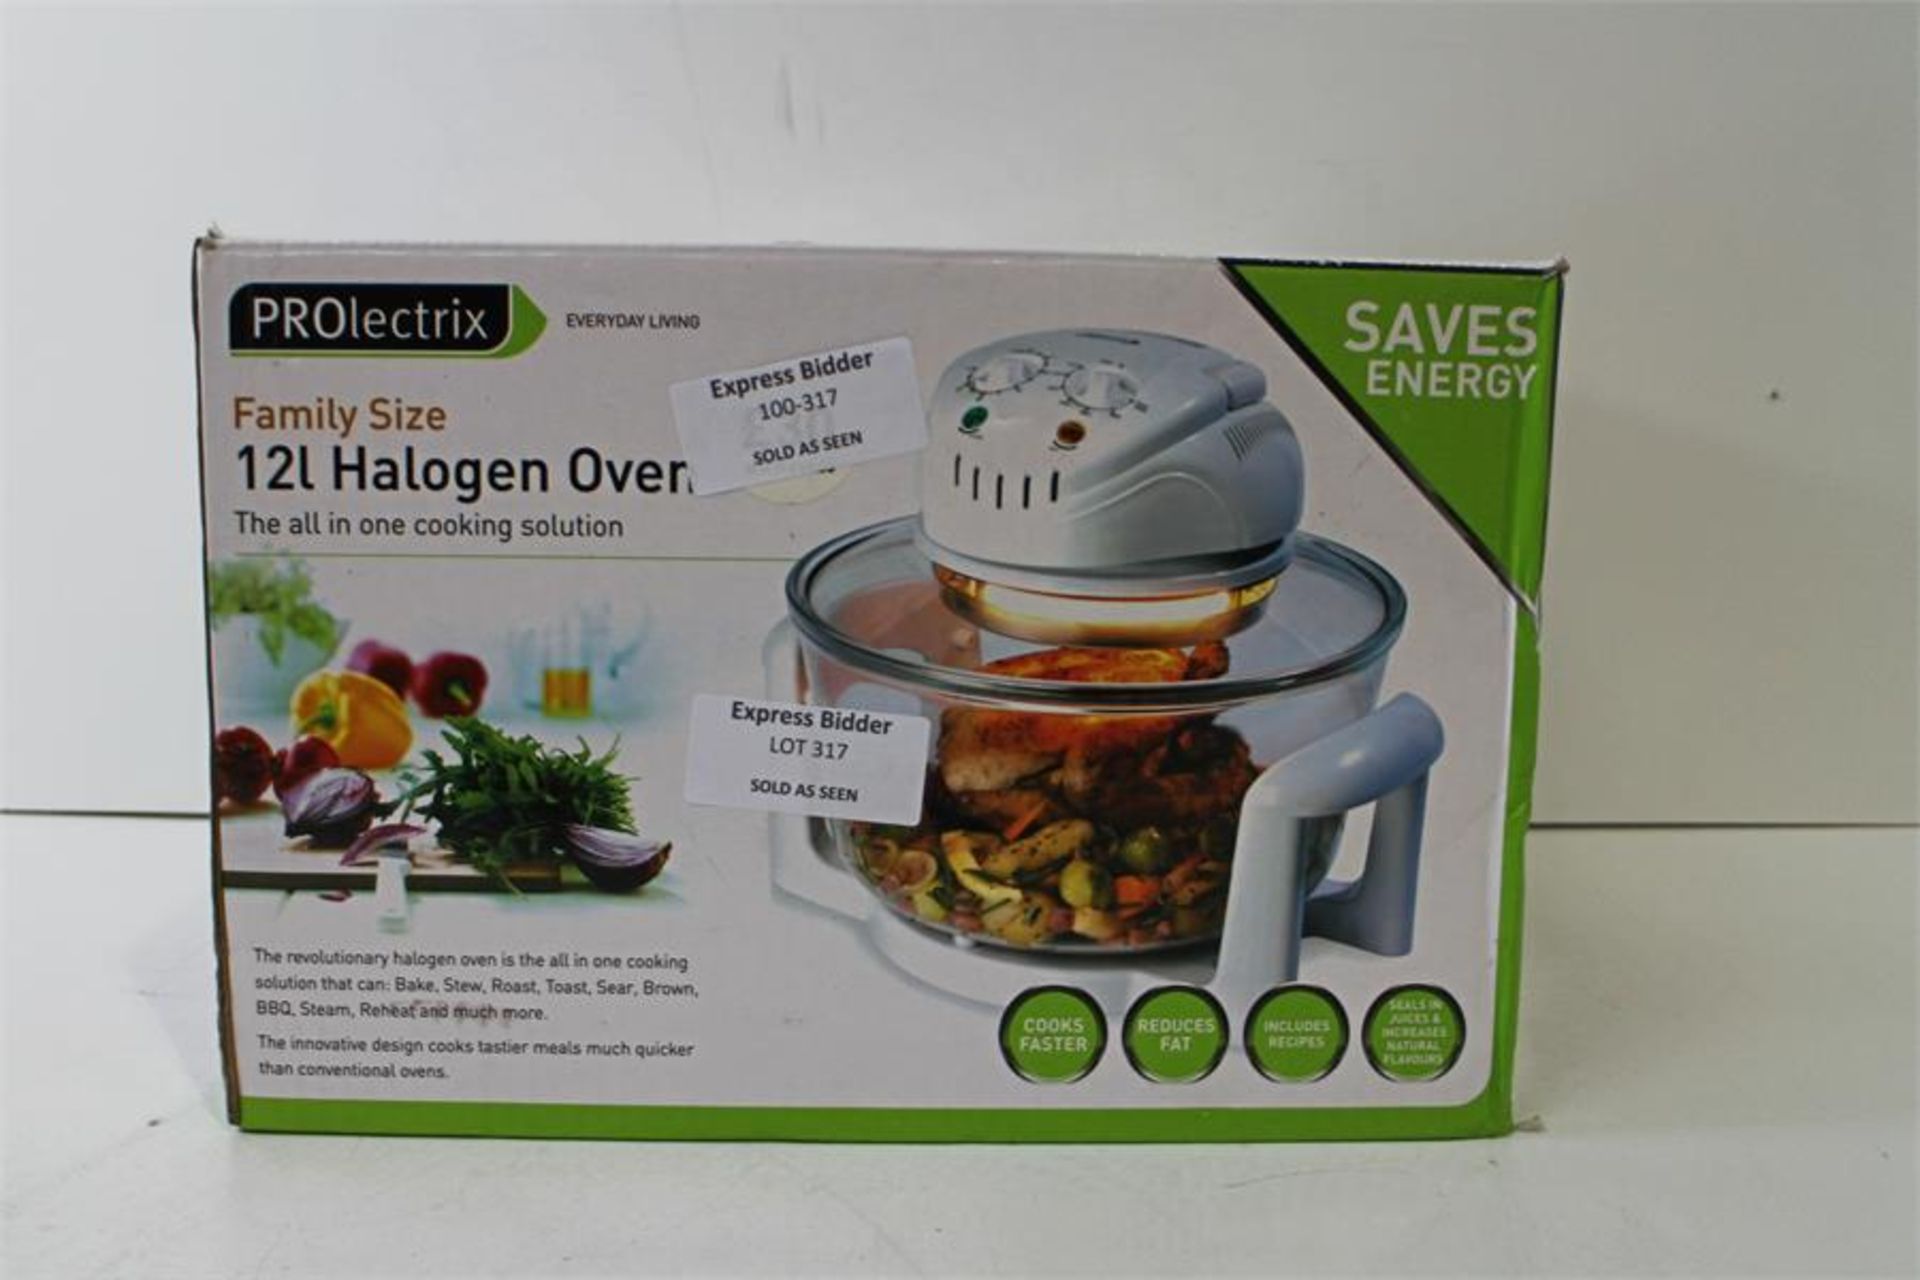 Prolectrix Family 12L Family Size Halogen Oven